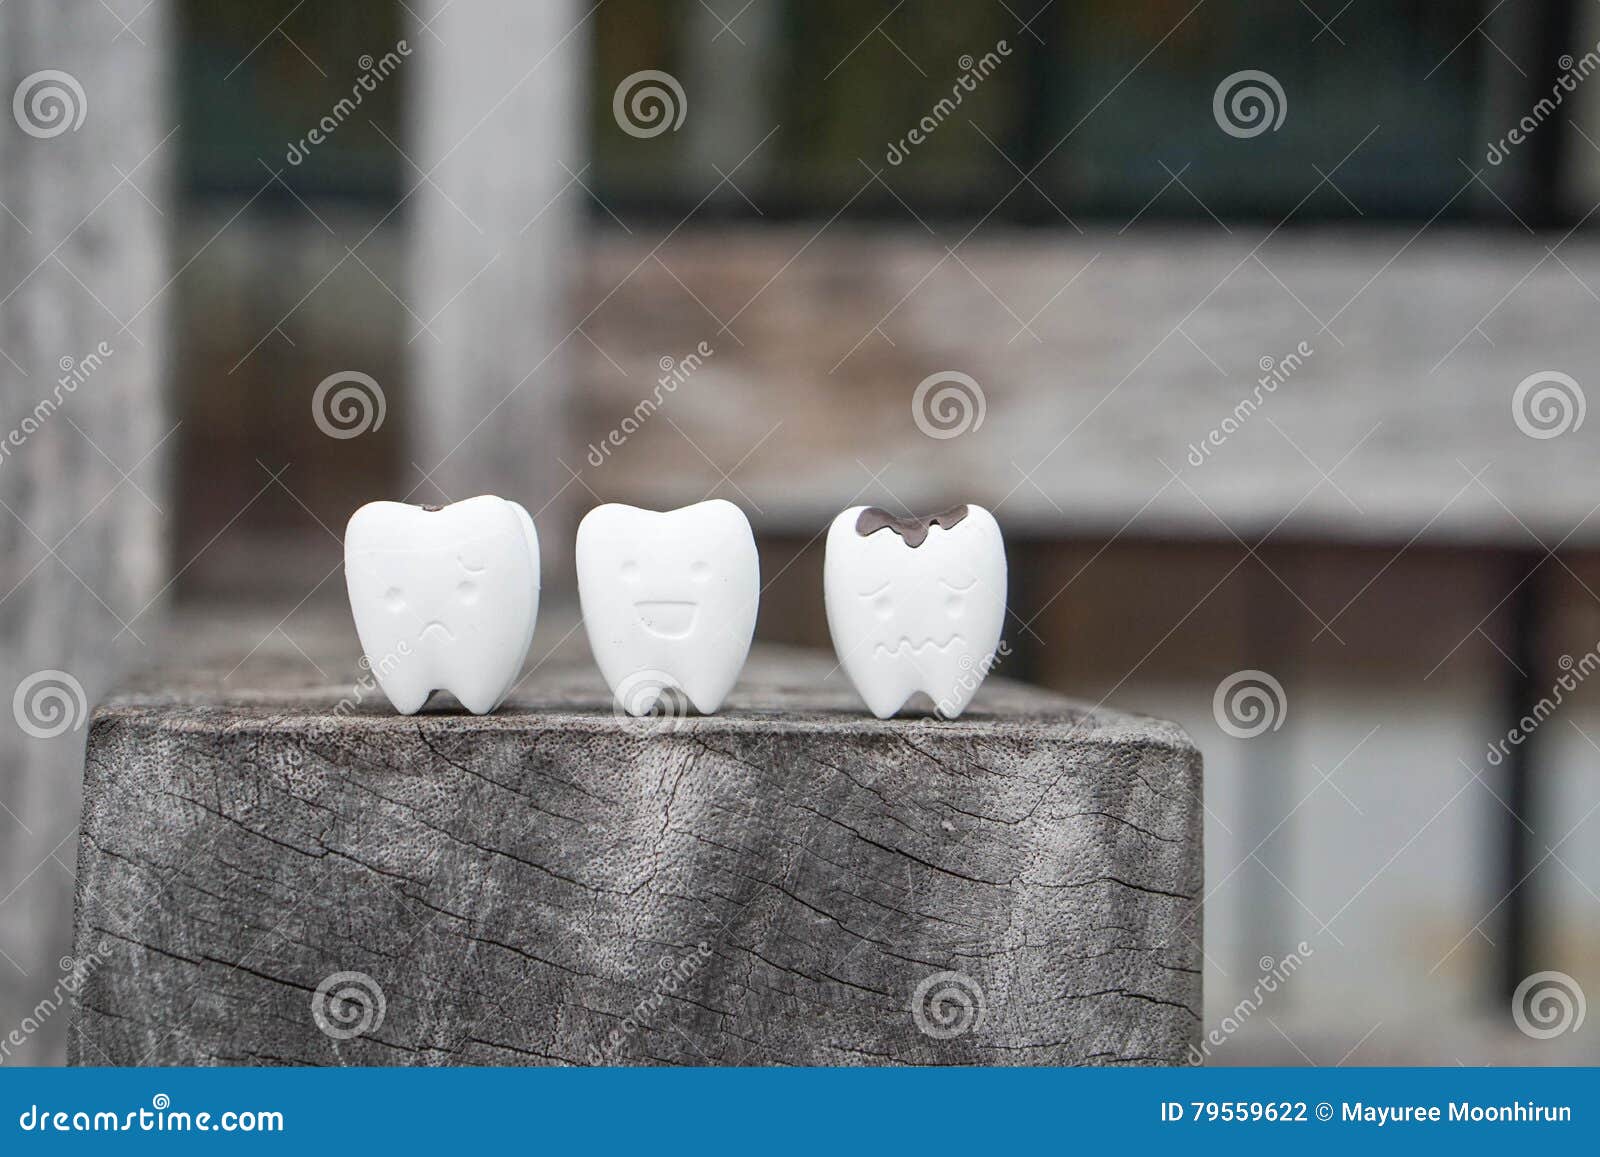 icon of decayed tooth and healthy tooth